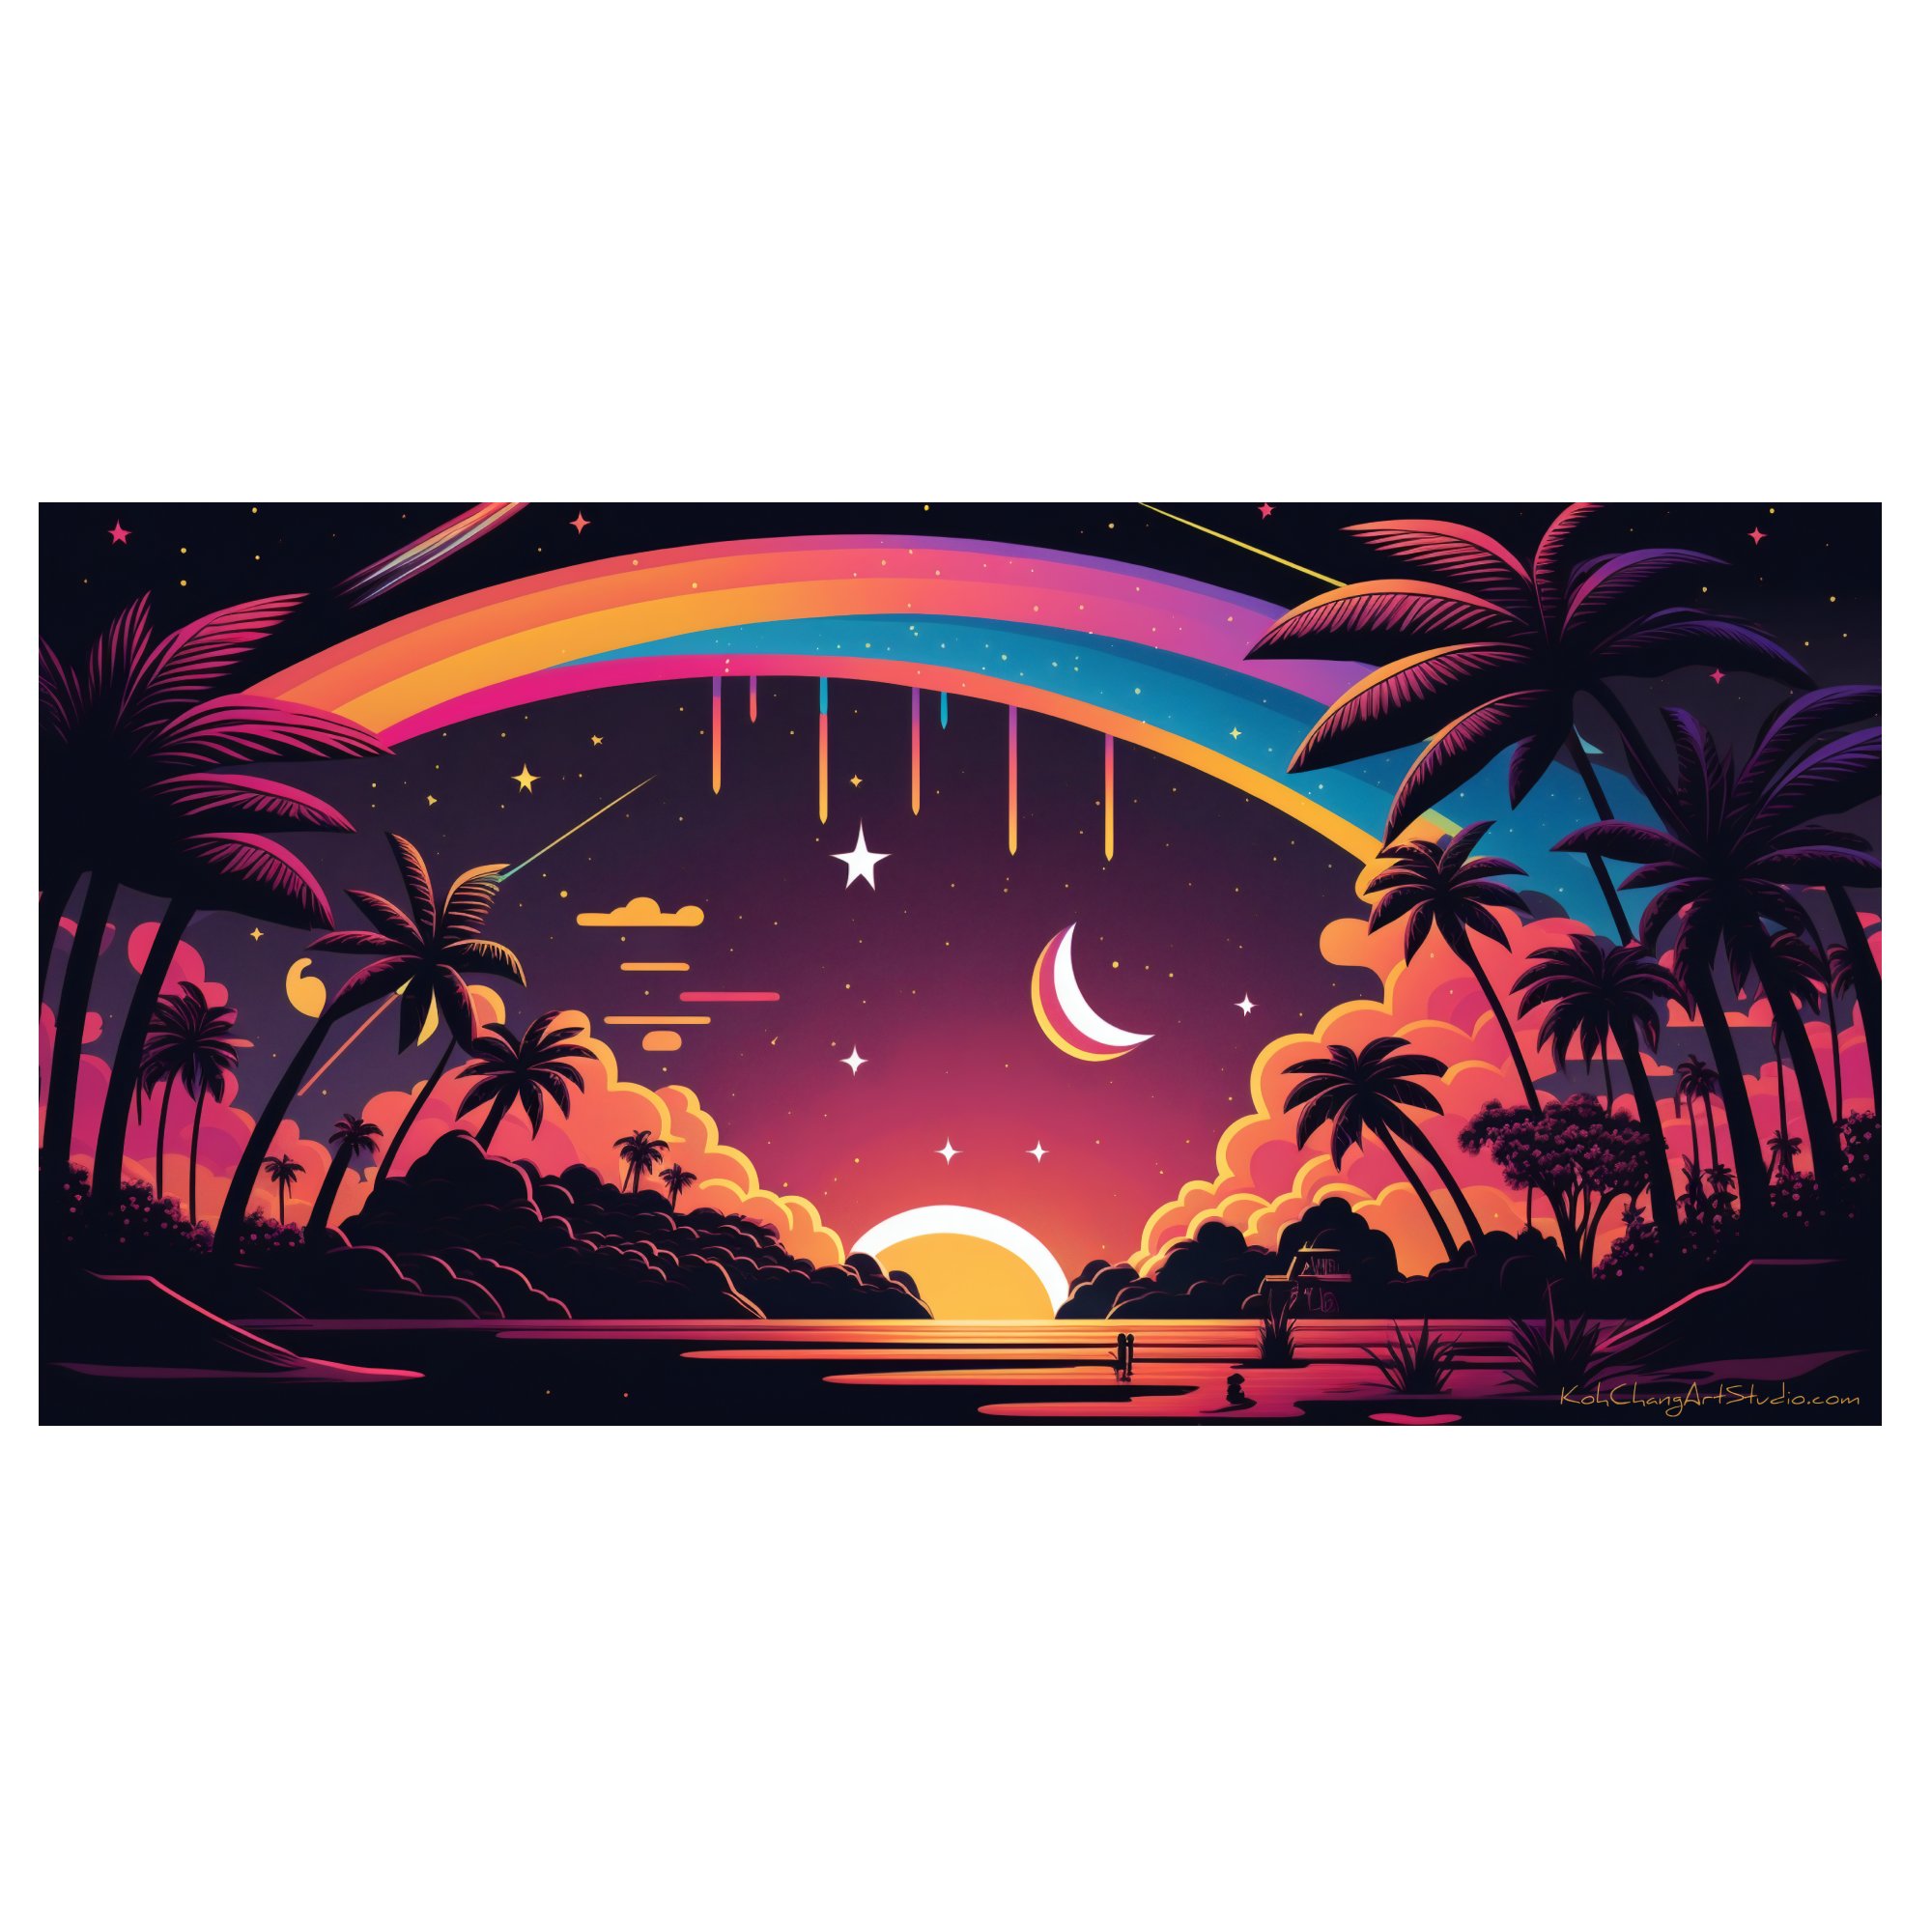 TROPIC STARSCAPE Artistic Depiction - Silhouetted trees, crescent Luna, and constellations with a melting rainbow overhead.